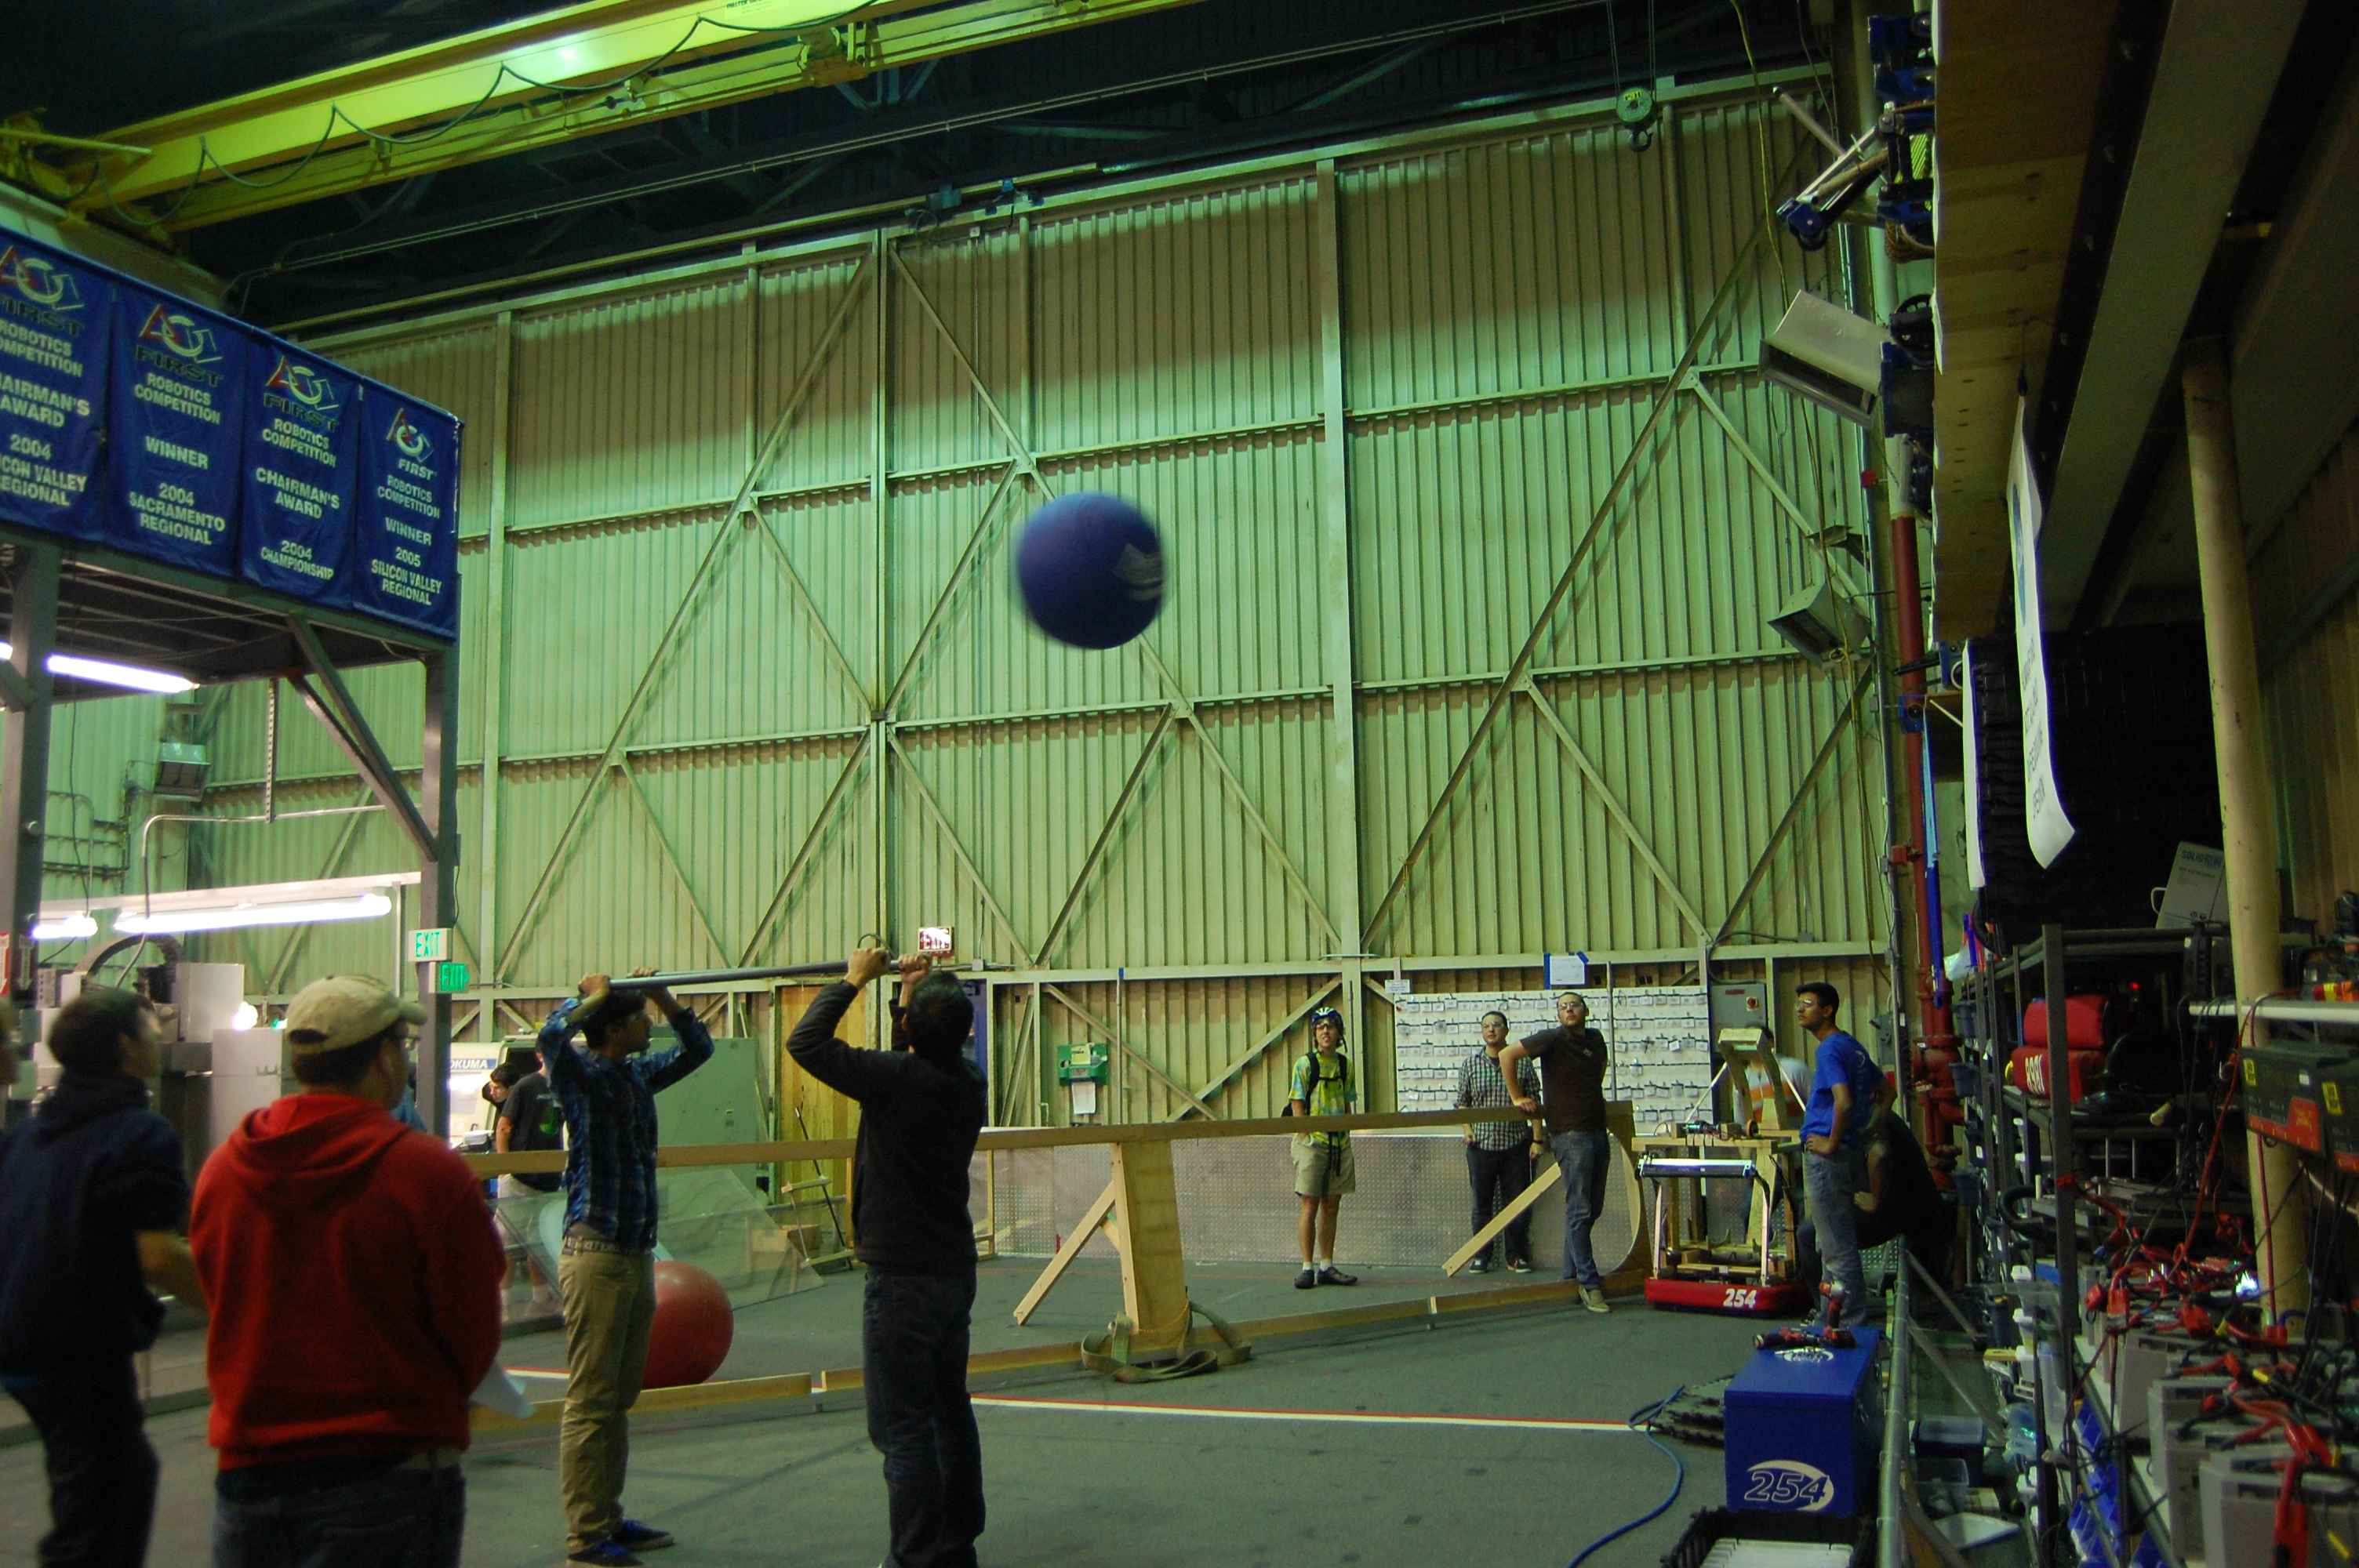 New Flywheel Shooter Launching Ball Higher than Before